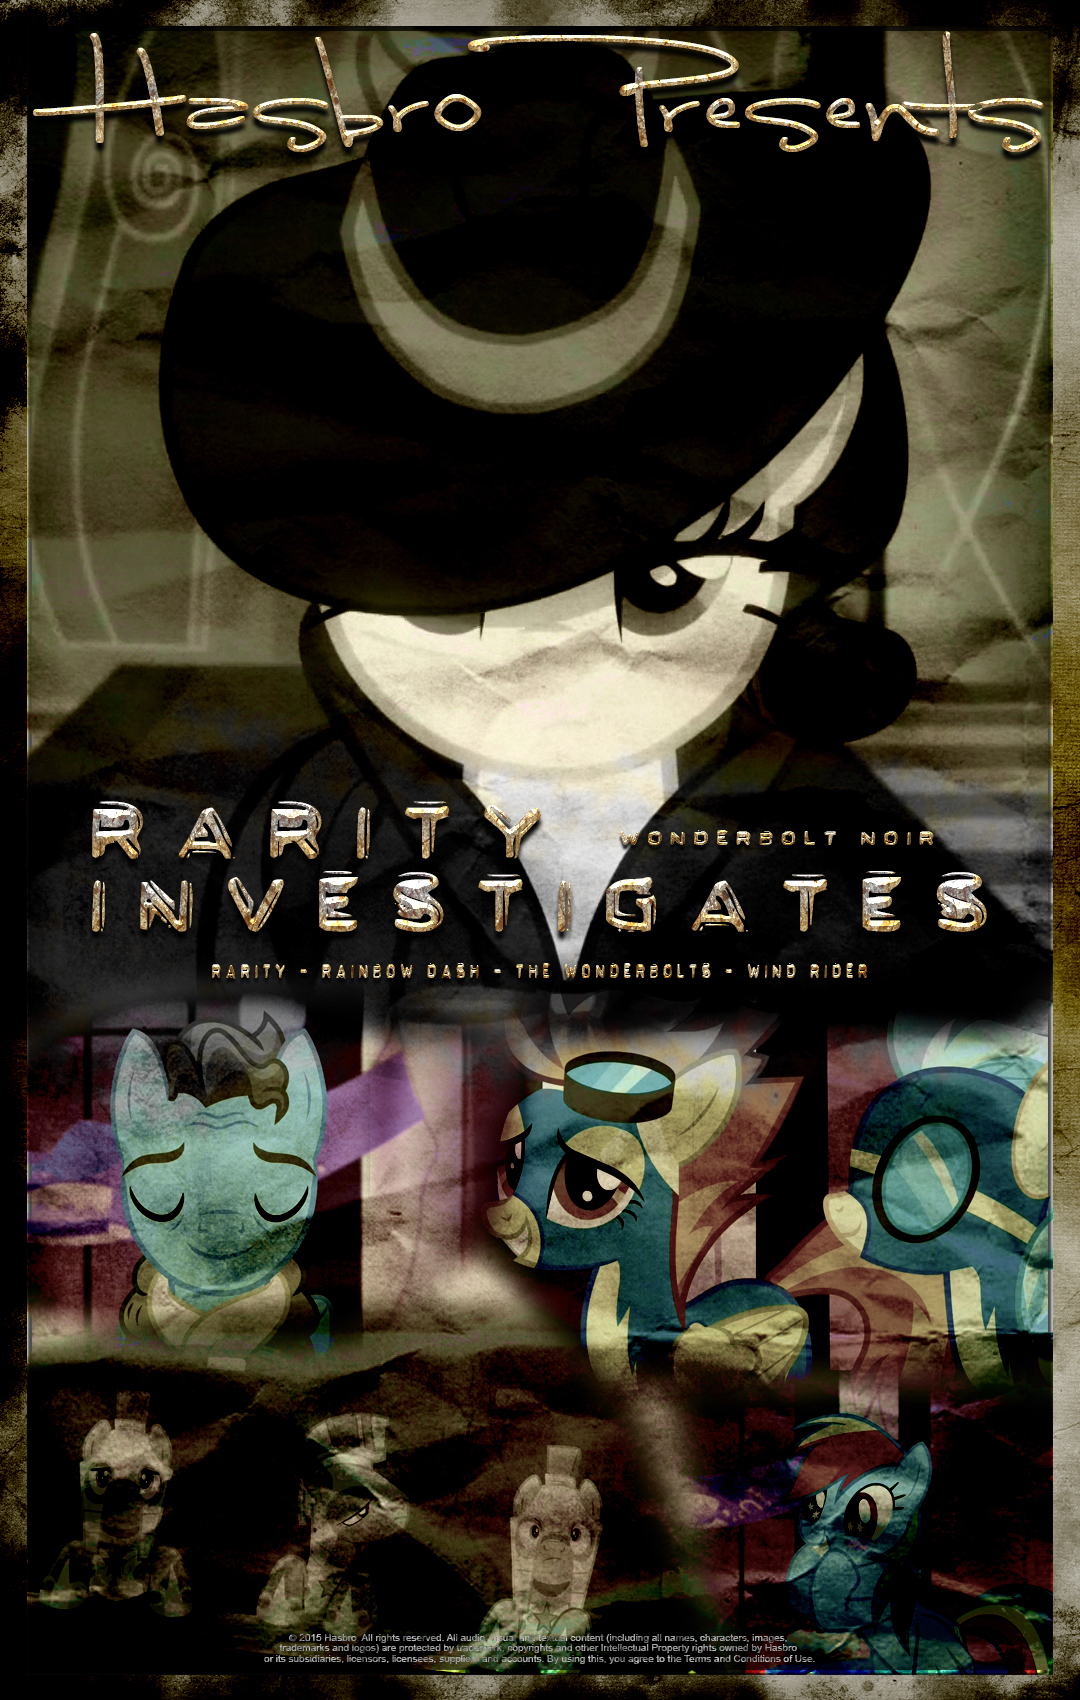 mlp___rarity_investigates___movie_poster_by_pims1978-d9a68dp.jpg